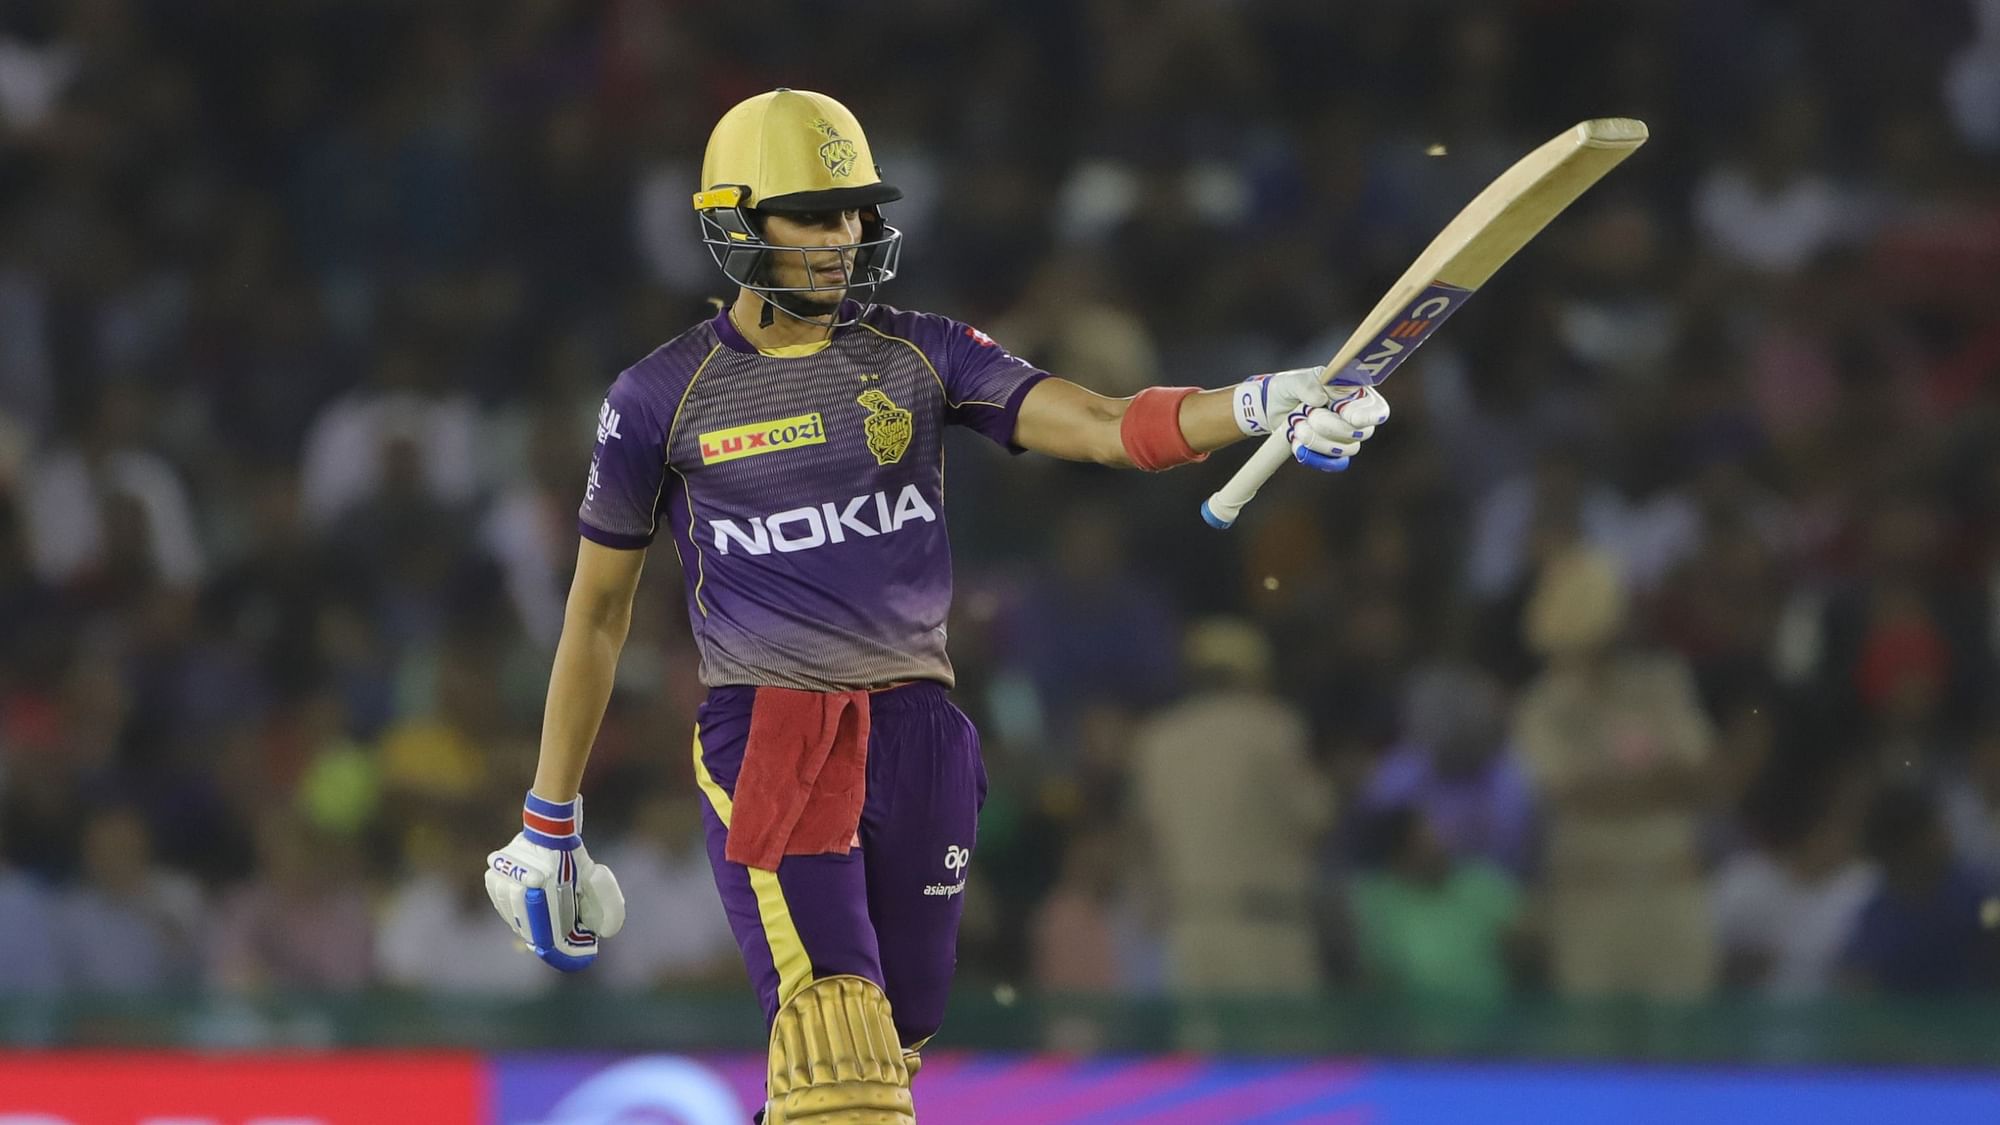 Kolkata Knight Riders defeated Kings XI Punjab by 7 wickets to stay alive in the playoffs race.